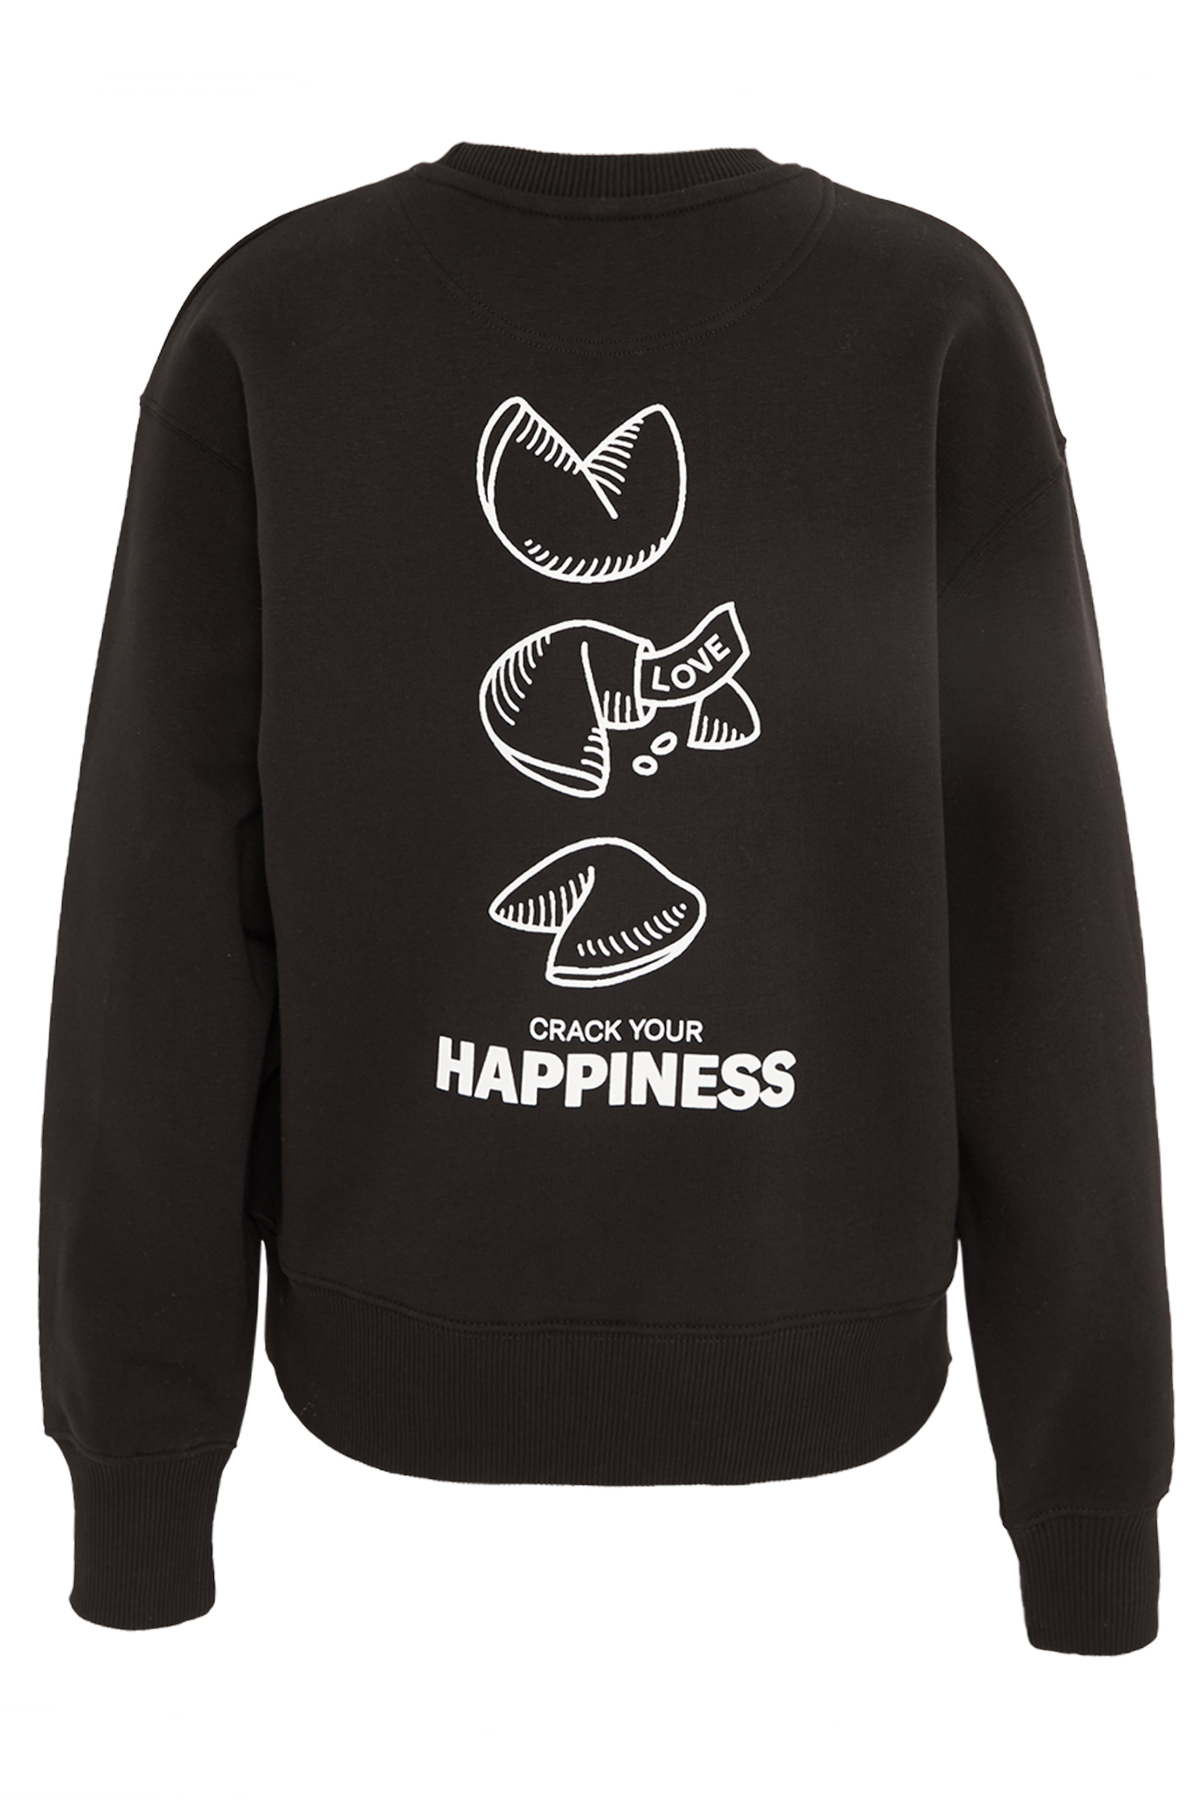 Crack Your Happiness Sweater